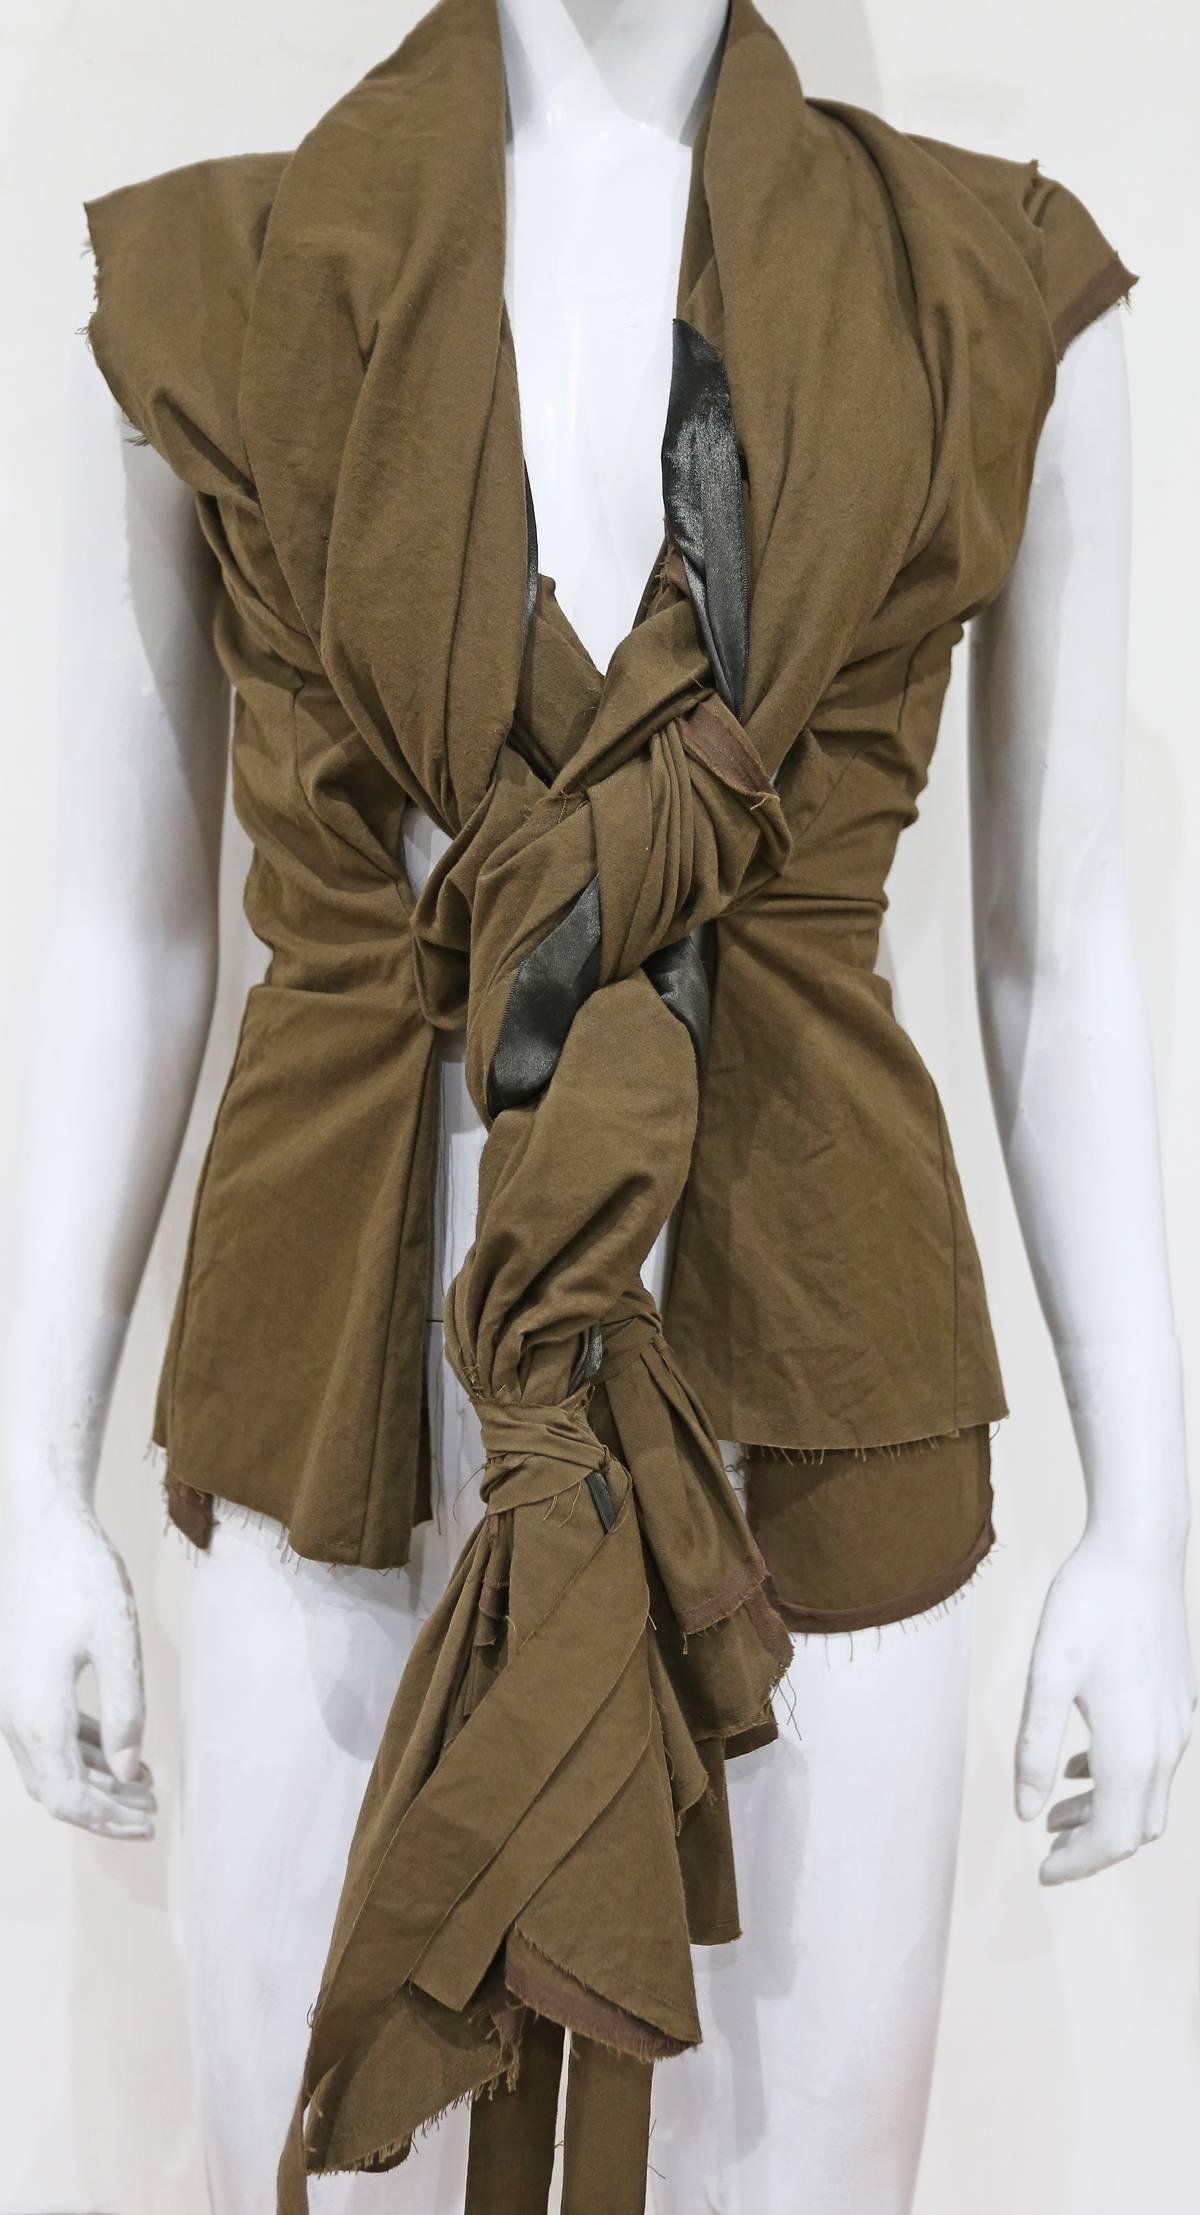 COMME des GARCONS khaki green bolero jacket from the SS 2003 collection. The jacket can be closed by plaiting the two braids together. 

